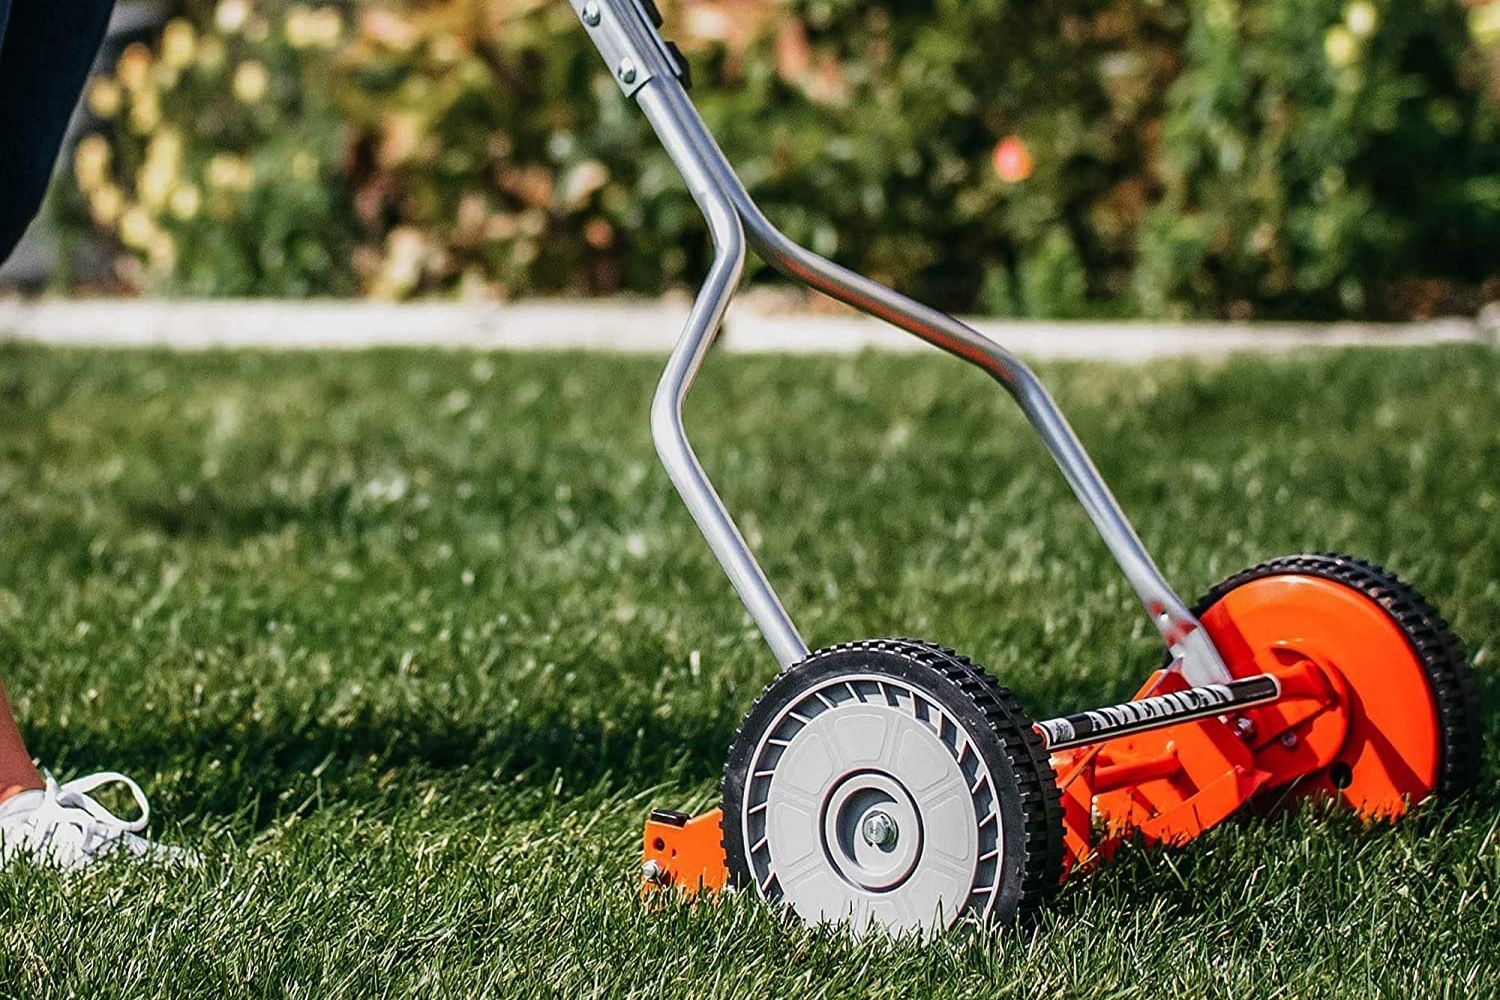 The best push mower option in use mowing a lawn